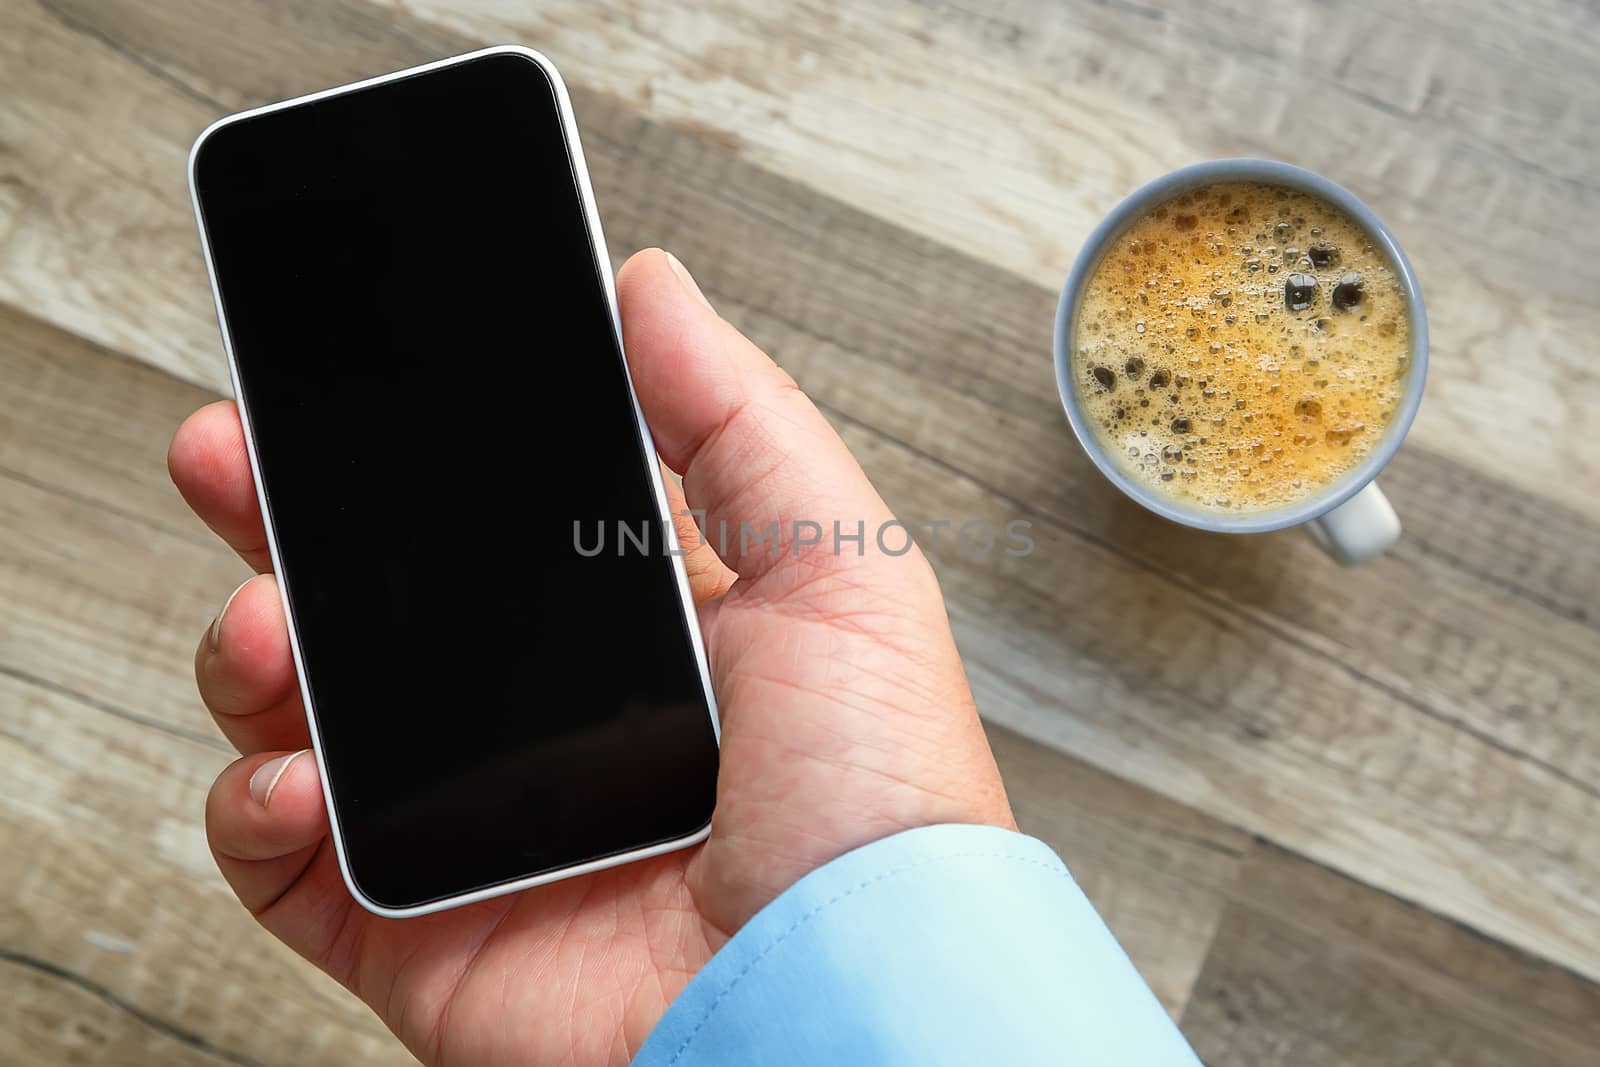 Smartphone in hand at work with a blank area to insert a custom image. Cup of tea and wooden floor on background